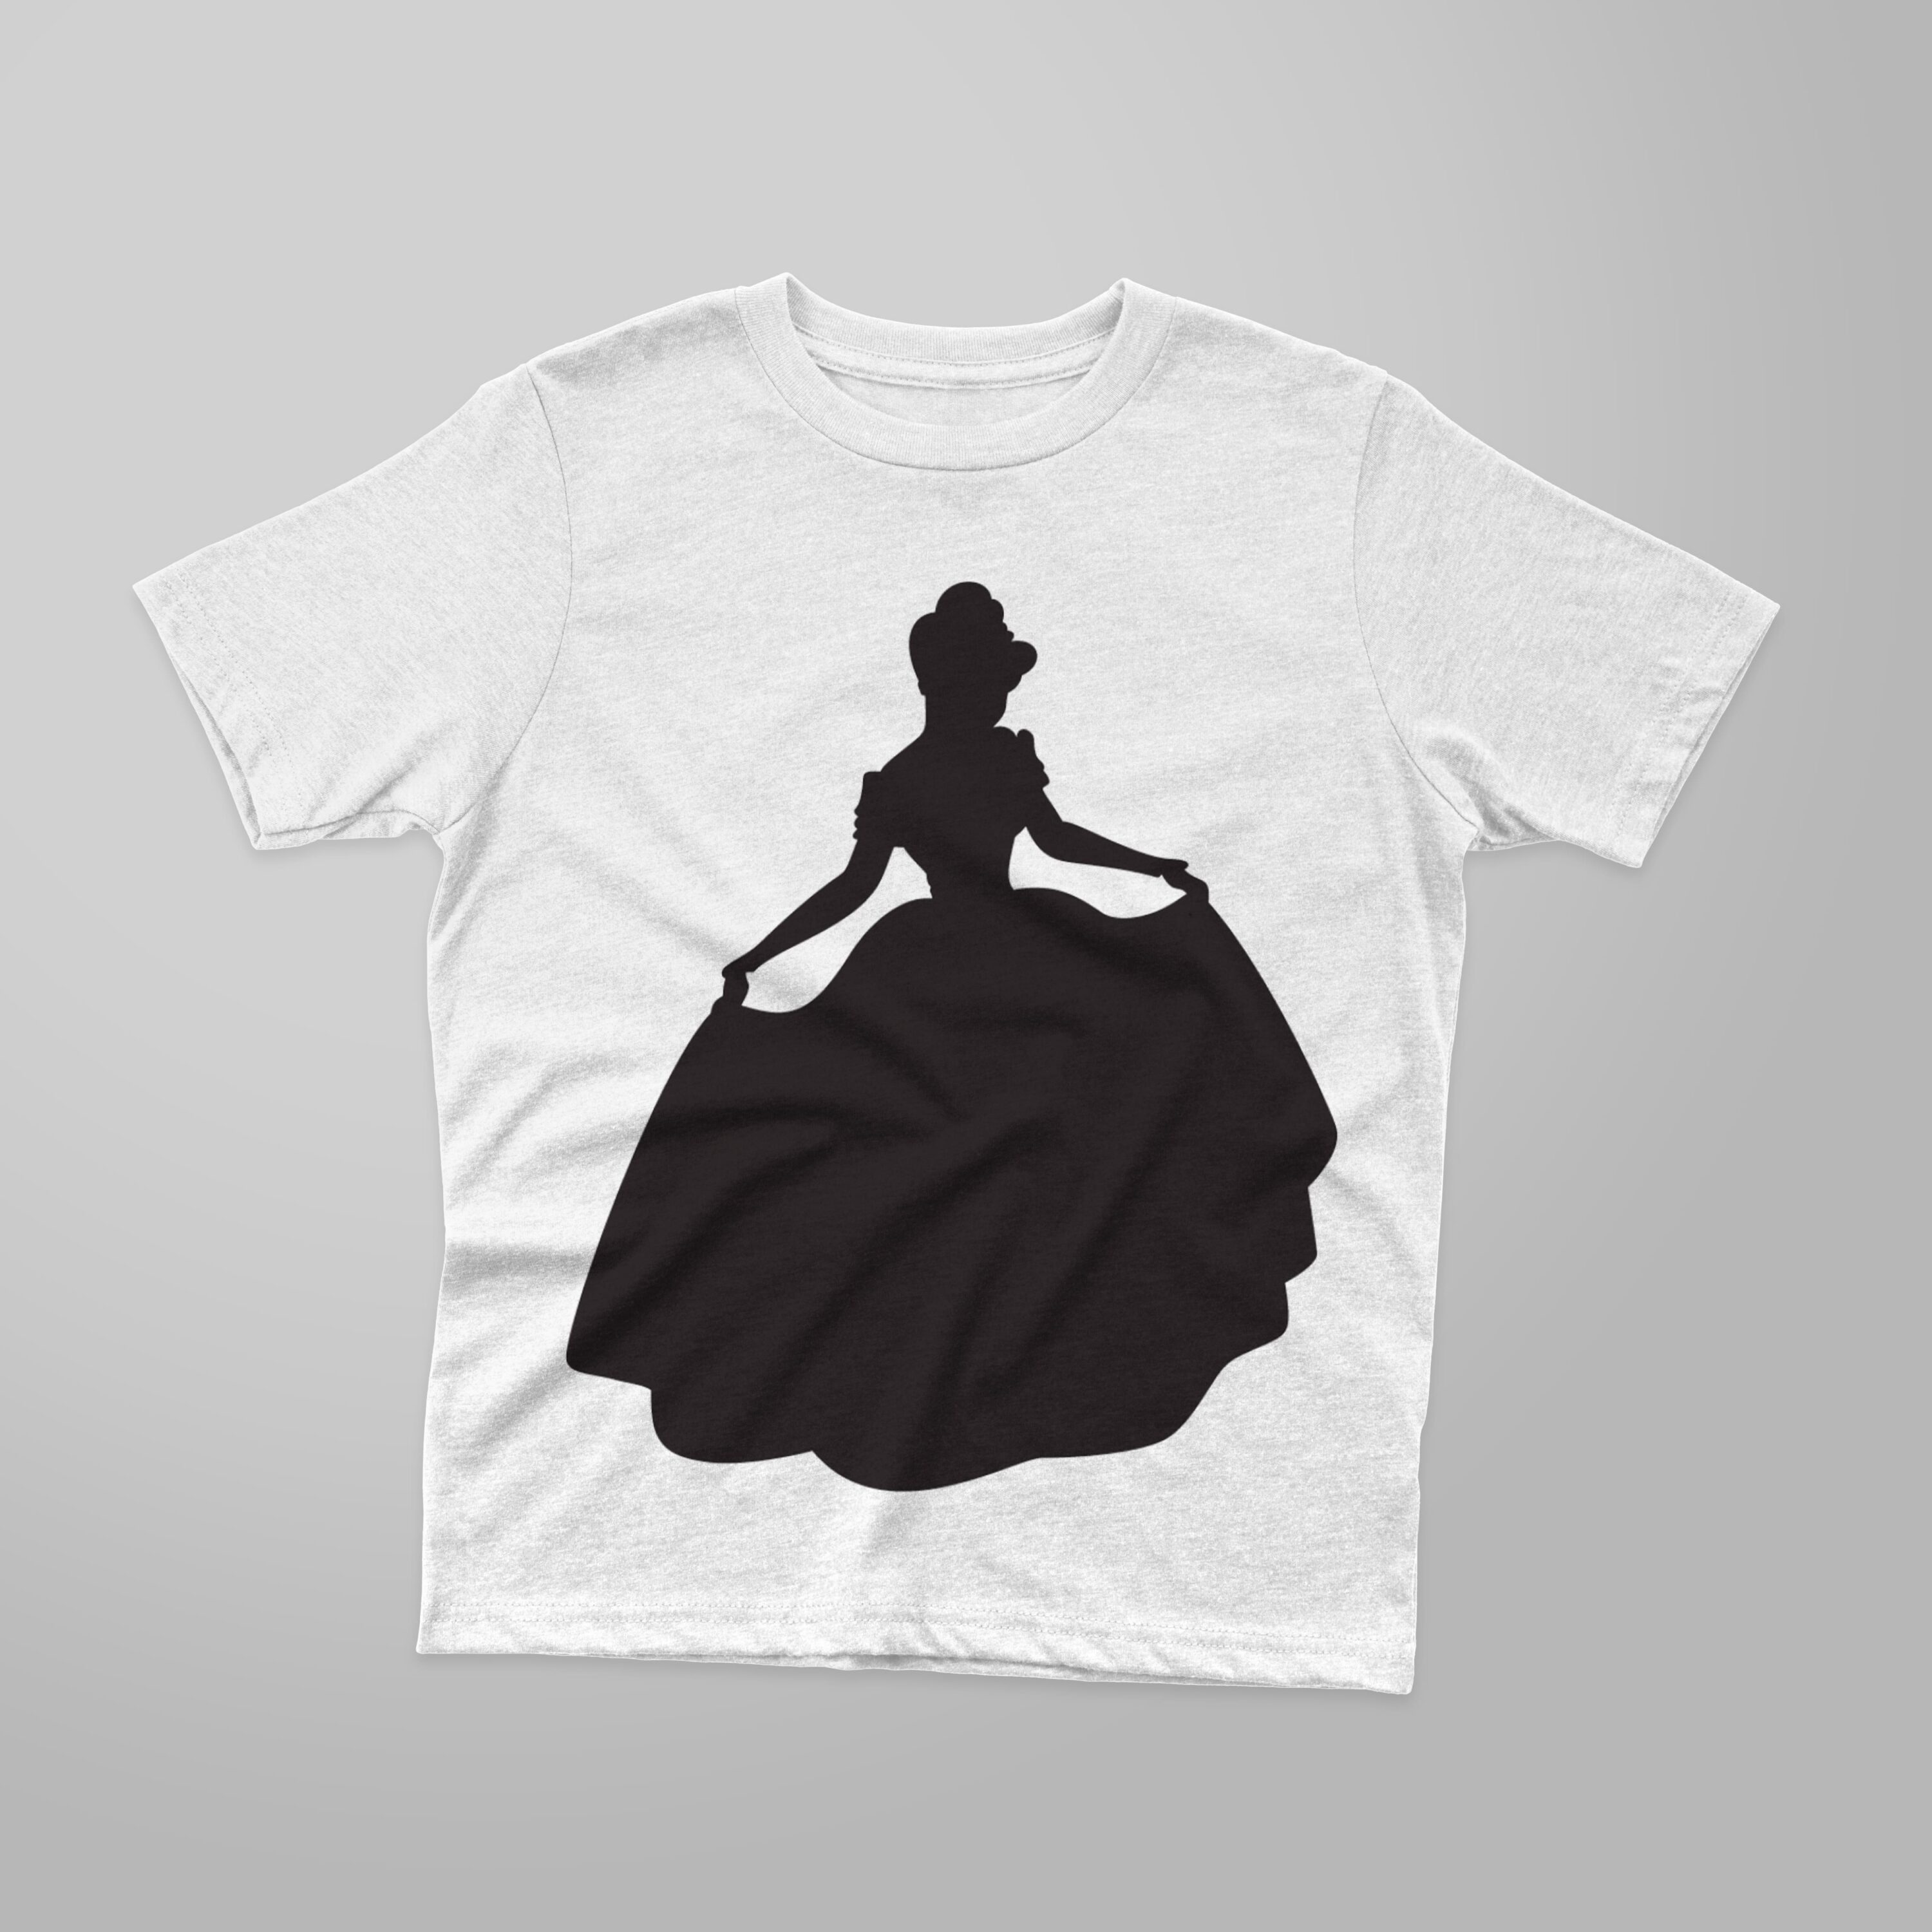 Image of a white t-shirt with an adorable print of the Cinderella silhouette.